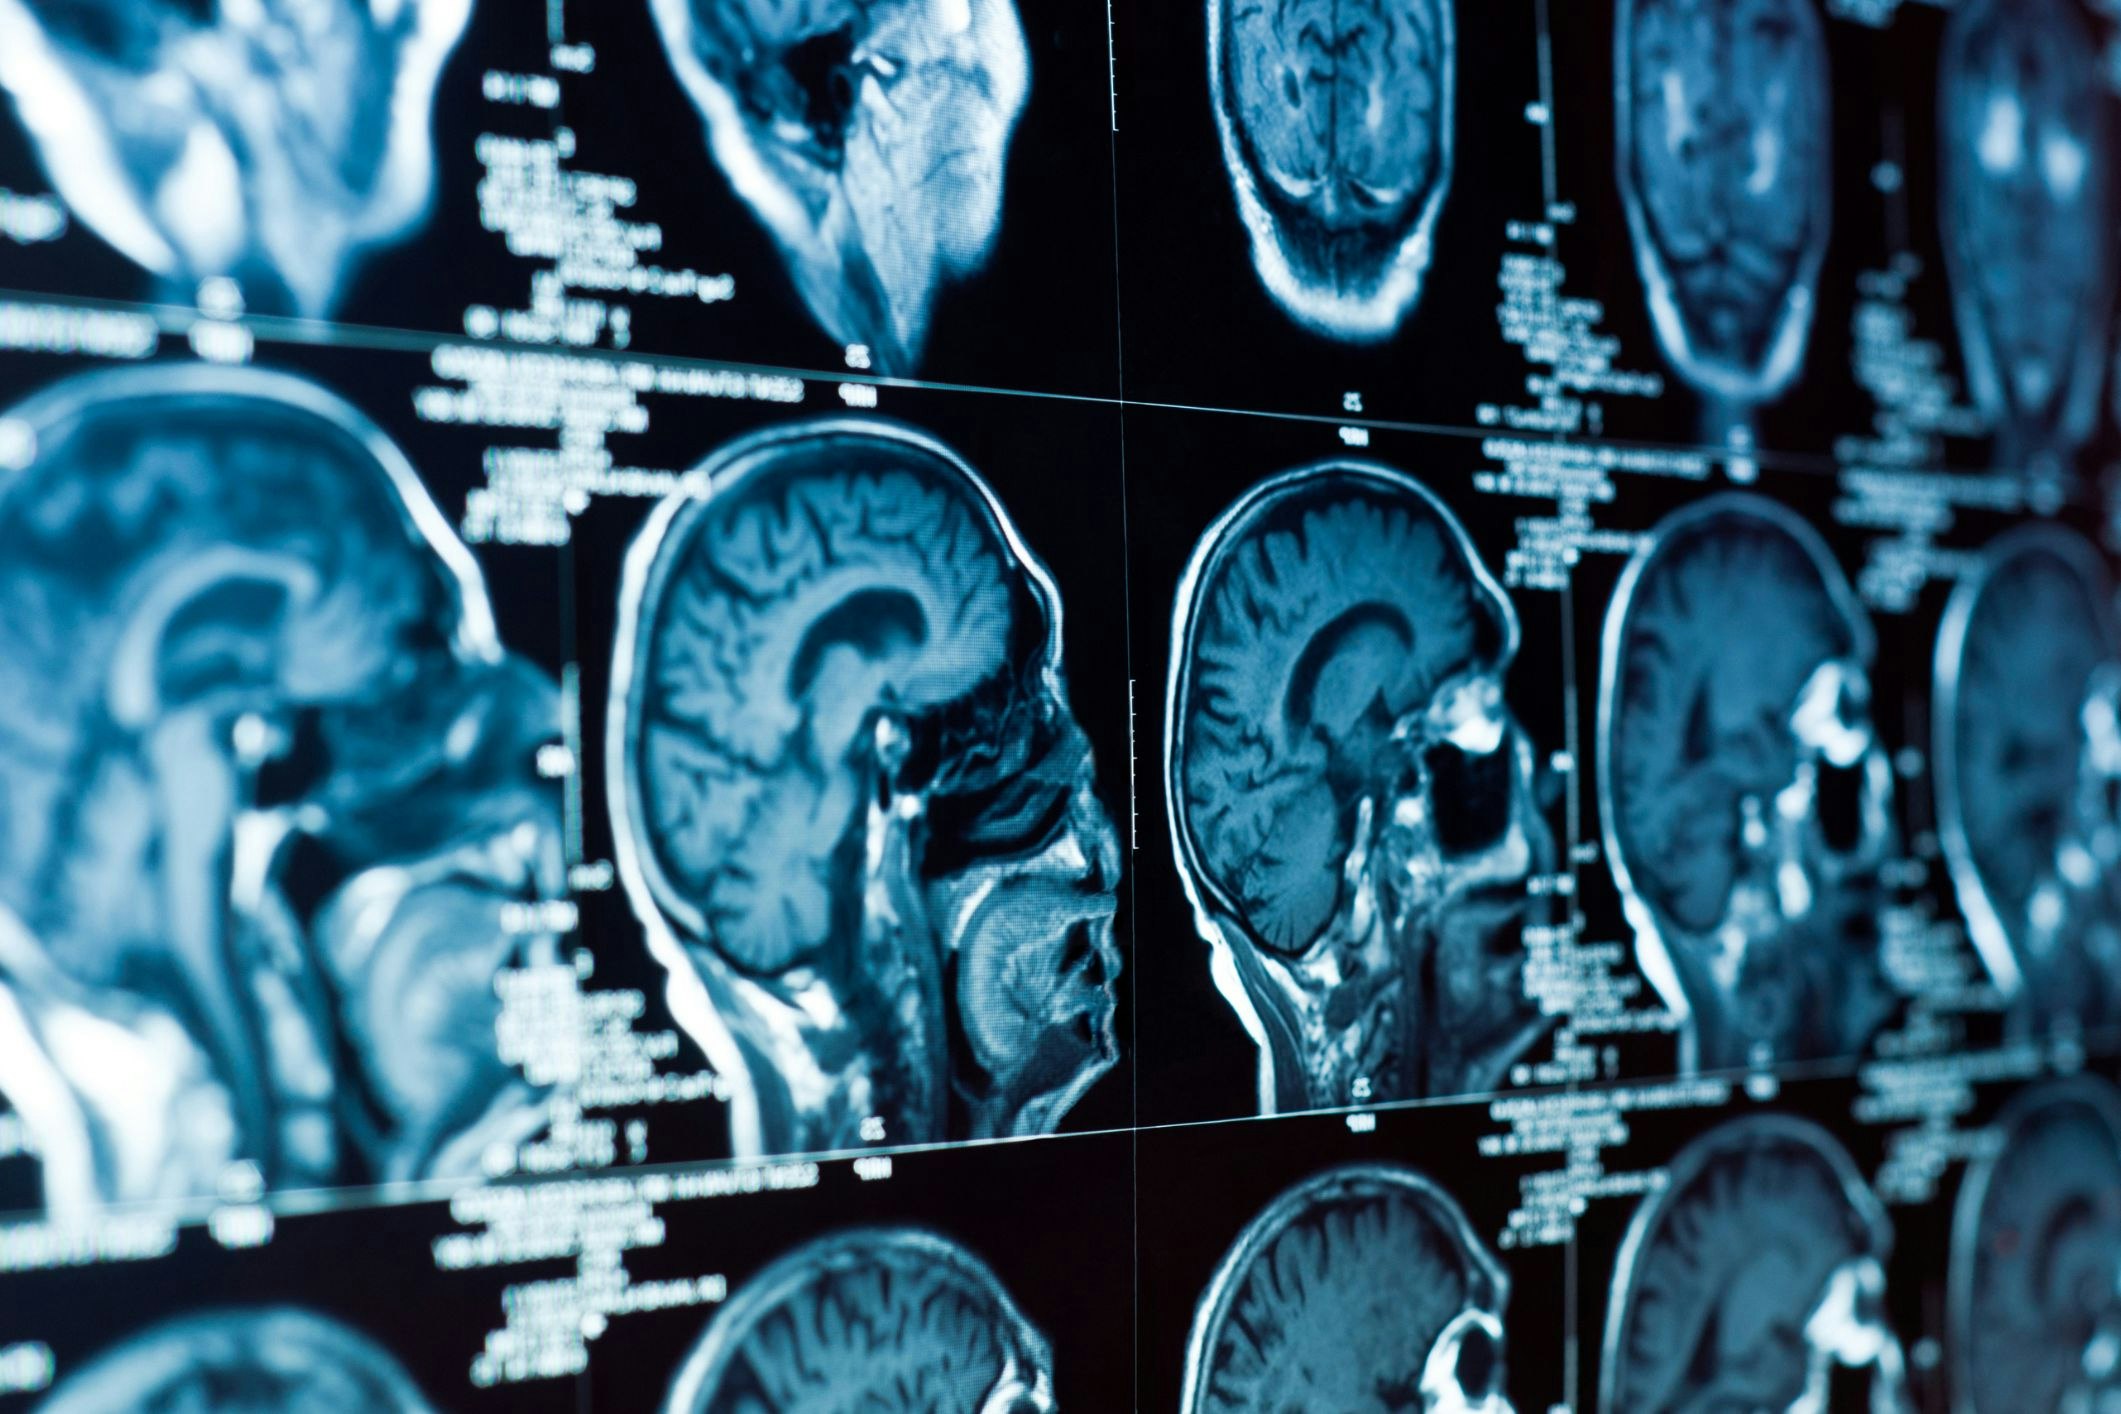 <p>The approach developed by the Monash University team opened new opportunities for mapping brain changes in mental illness. [Source: Shutterstock]</p>
